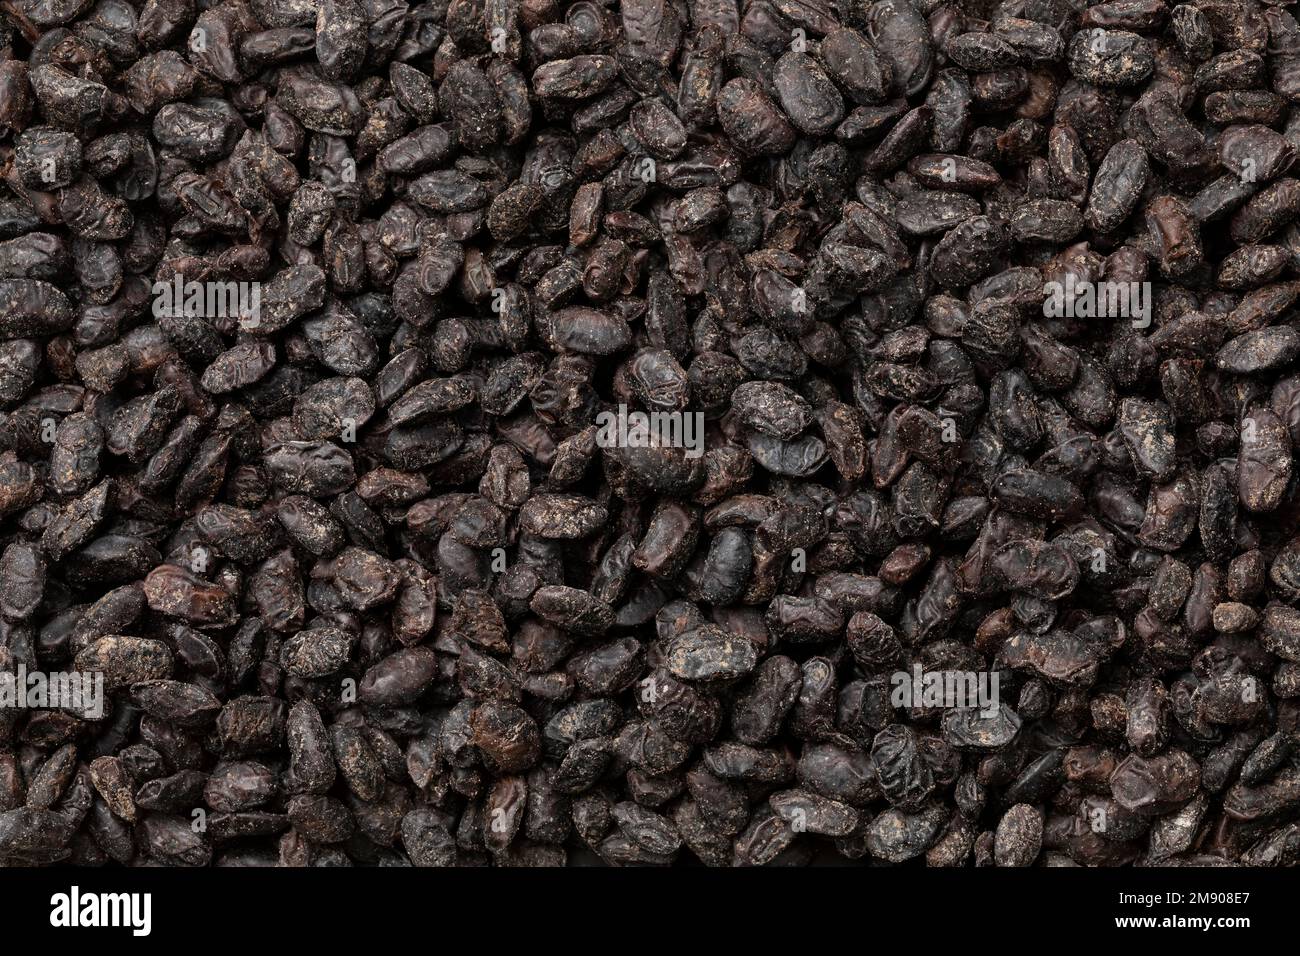 Chinese salted black beans as an ingredient close up full frame as background Stock Photo